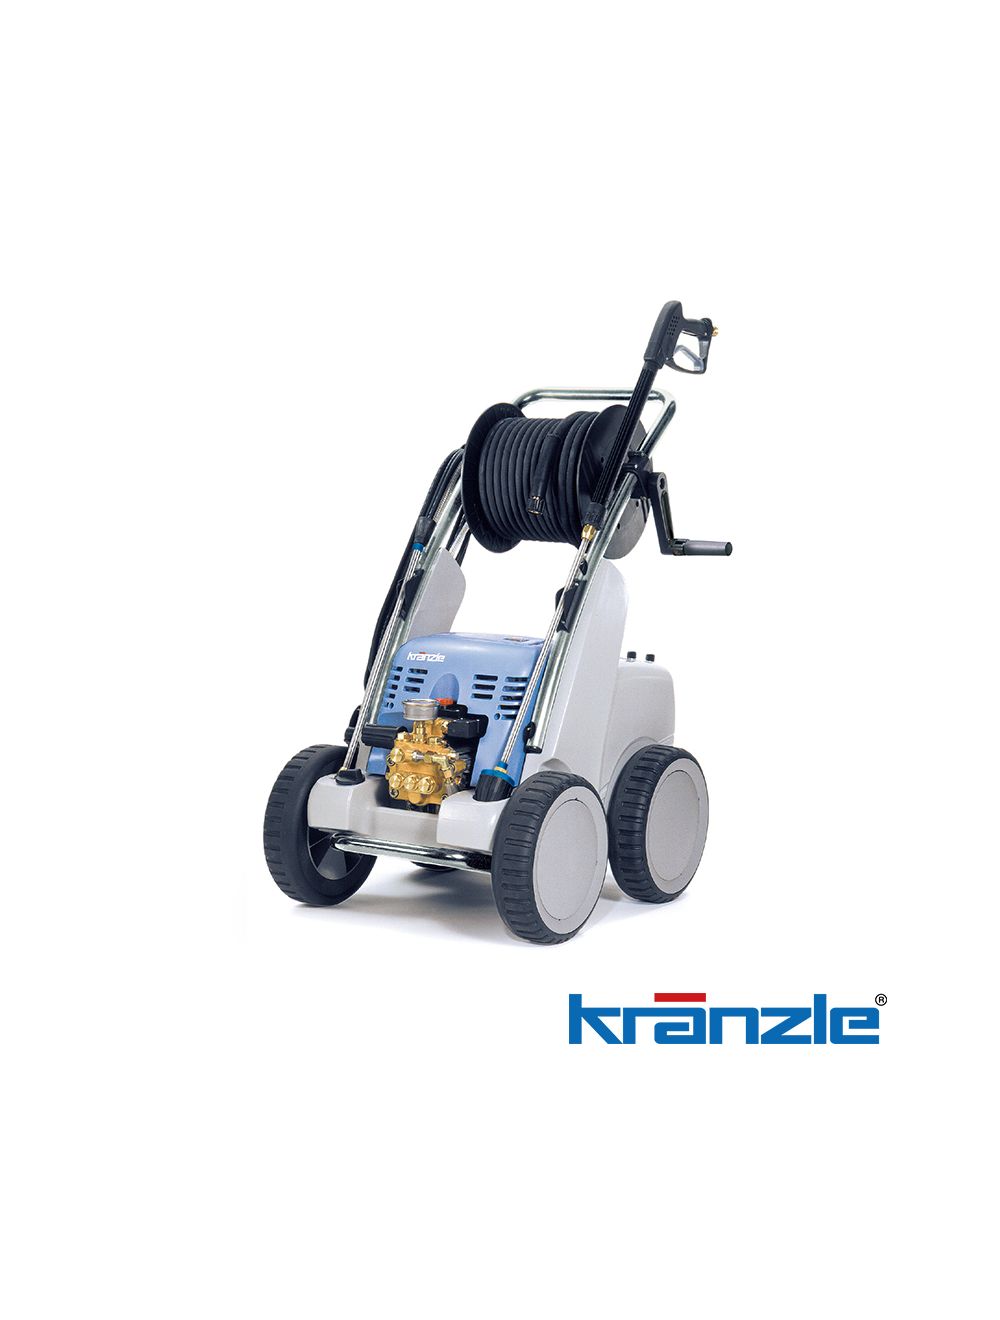 Kranzle Quadro Series  Quadro 1200 TST Automatic Cold Water Pressure Washer  - with 20m Hose Reel & DirtKiller Lance 415V - K40422